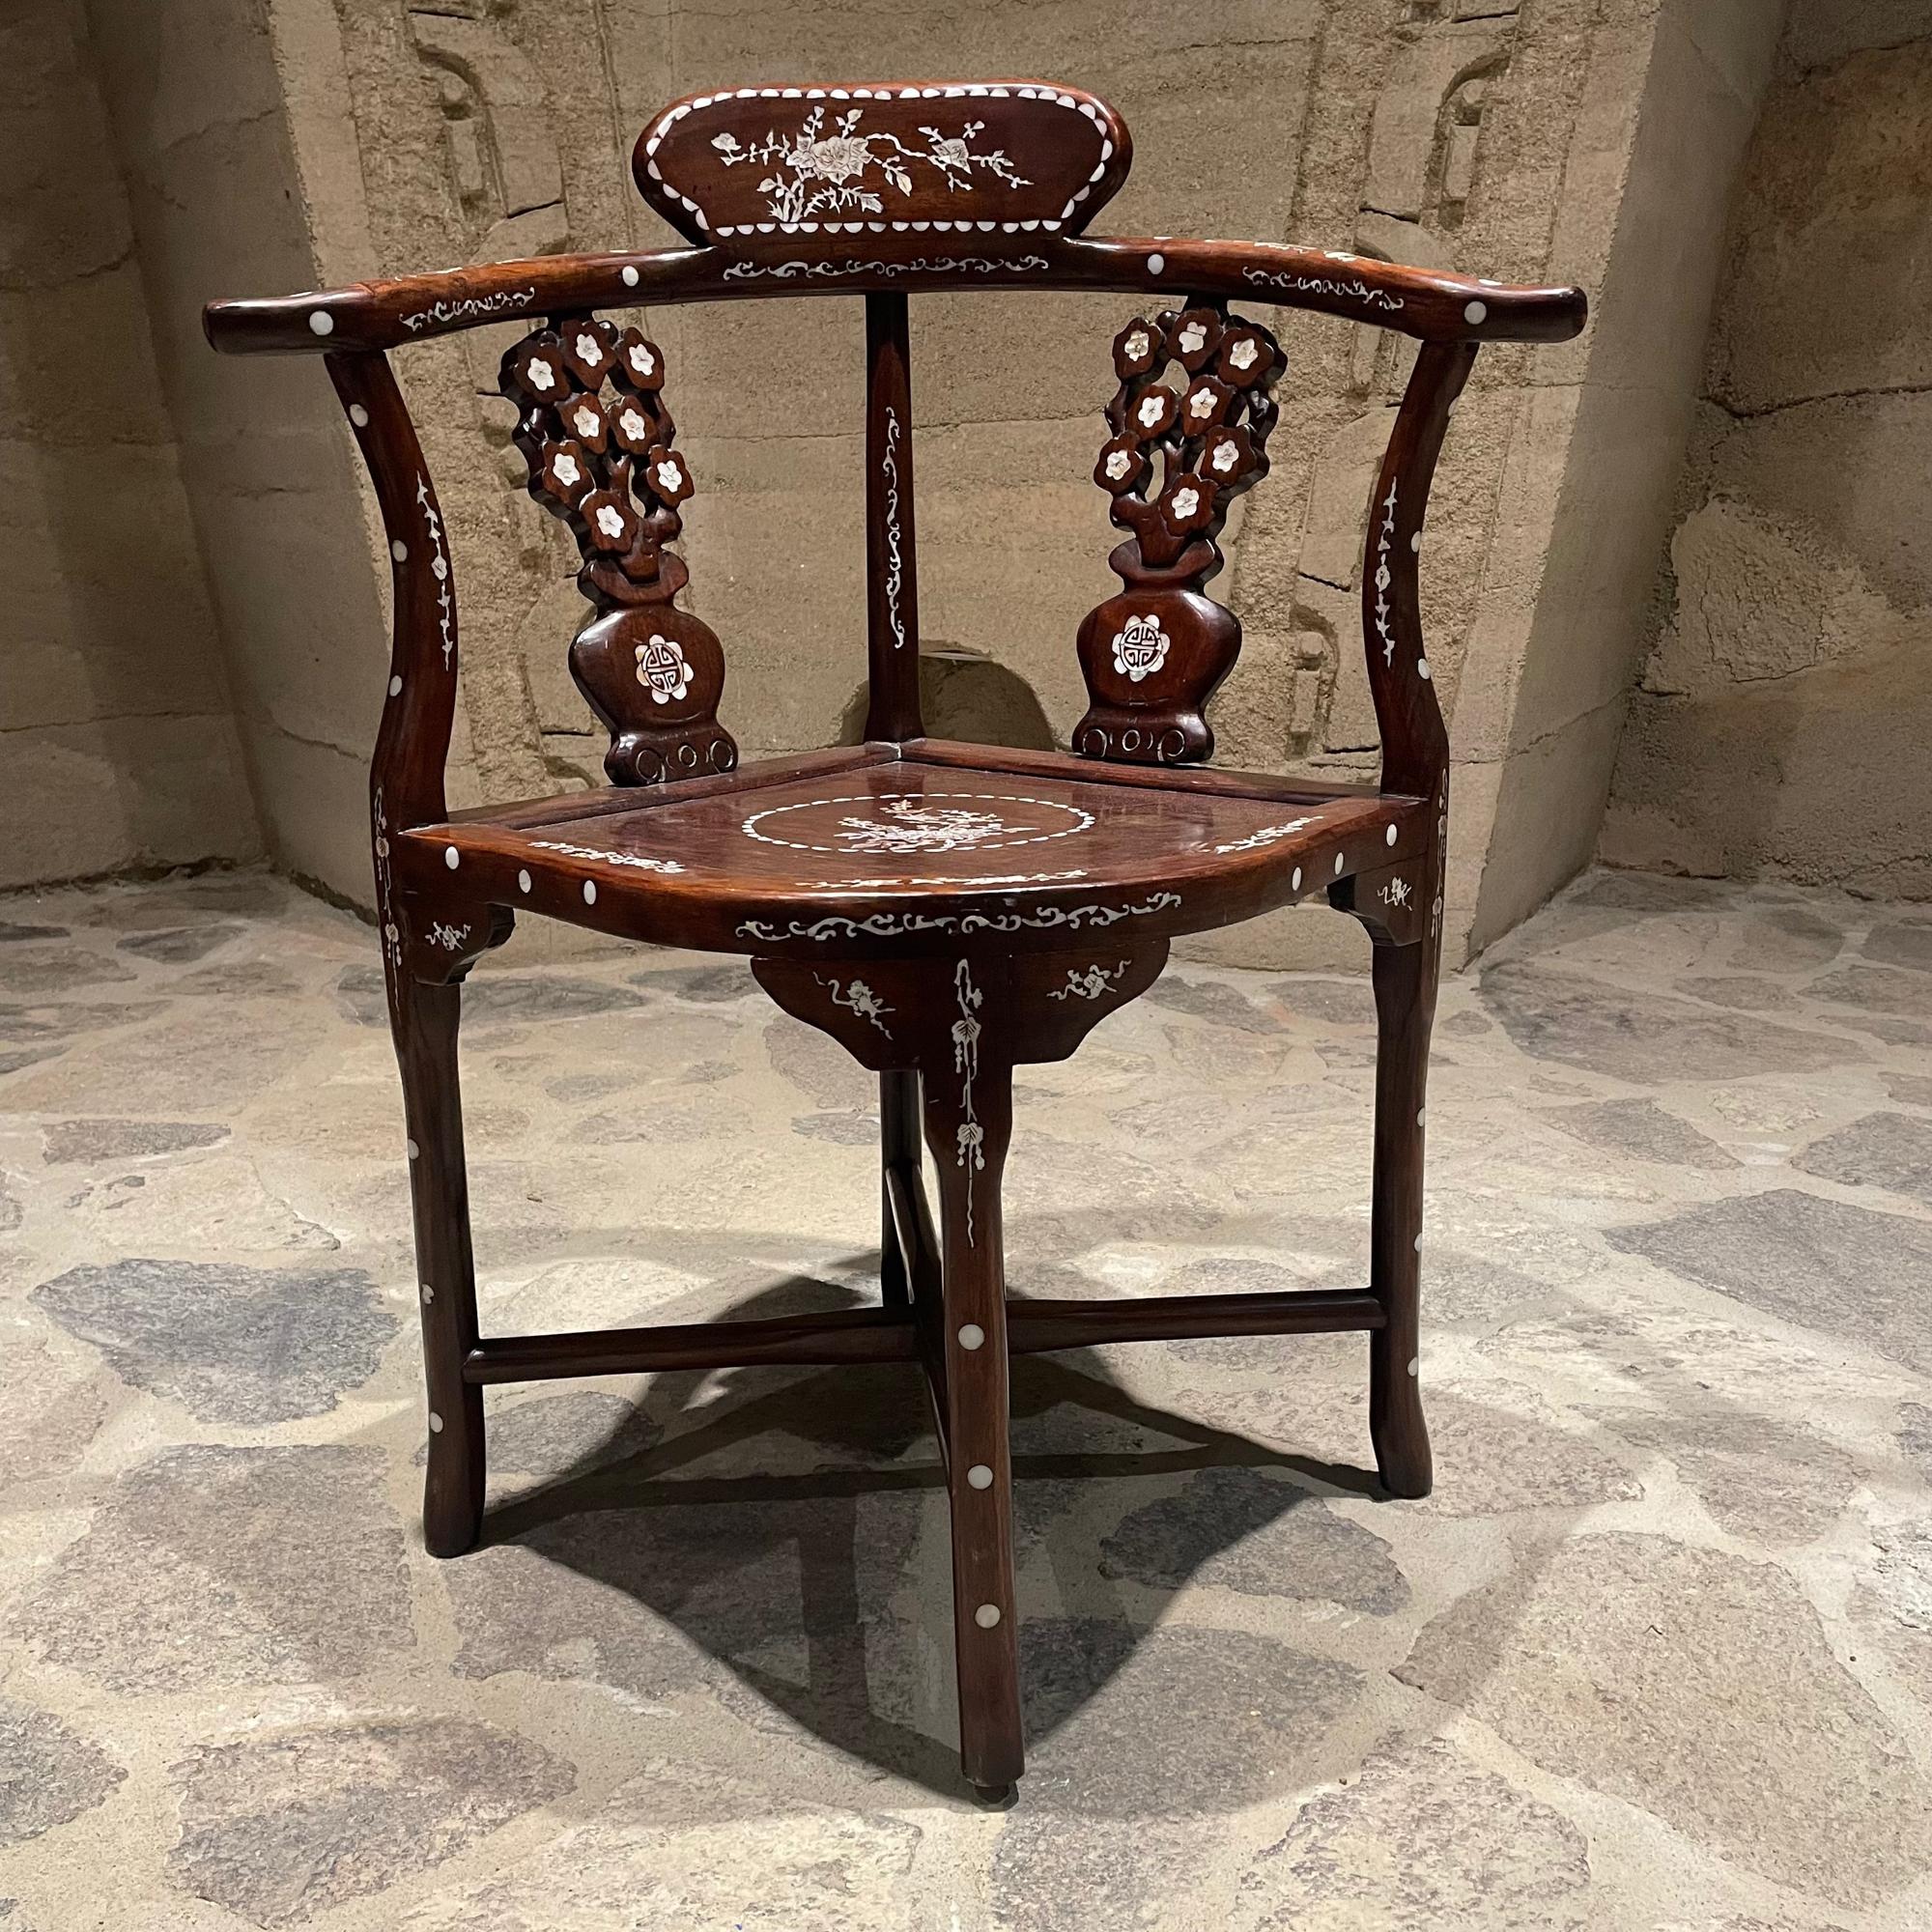 Mid-20th Century Lovely Handcrafted Chinese Corner Armchair Rosewood with Mother-of-Pearl Inlay For Sale